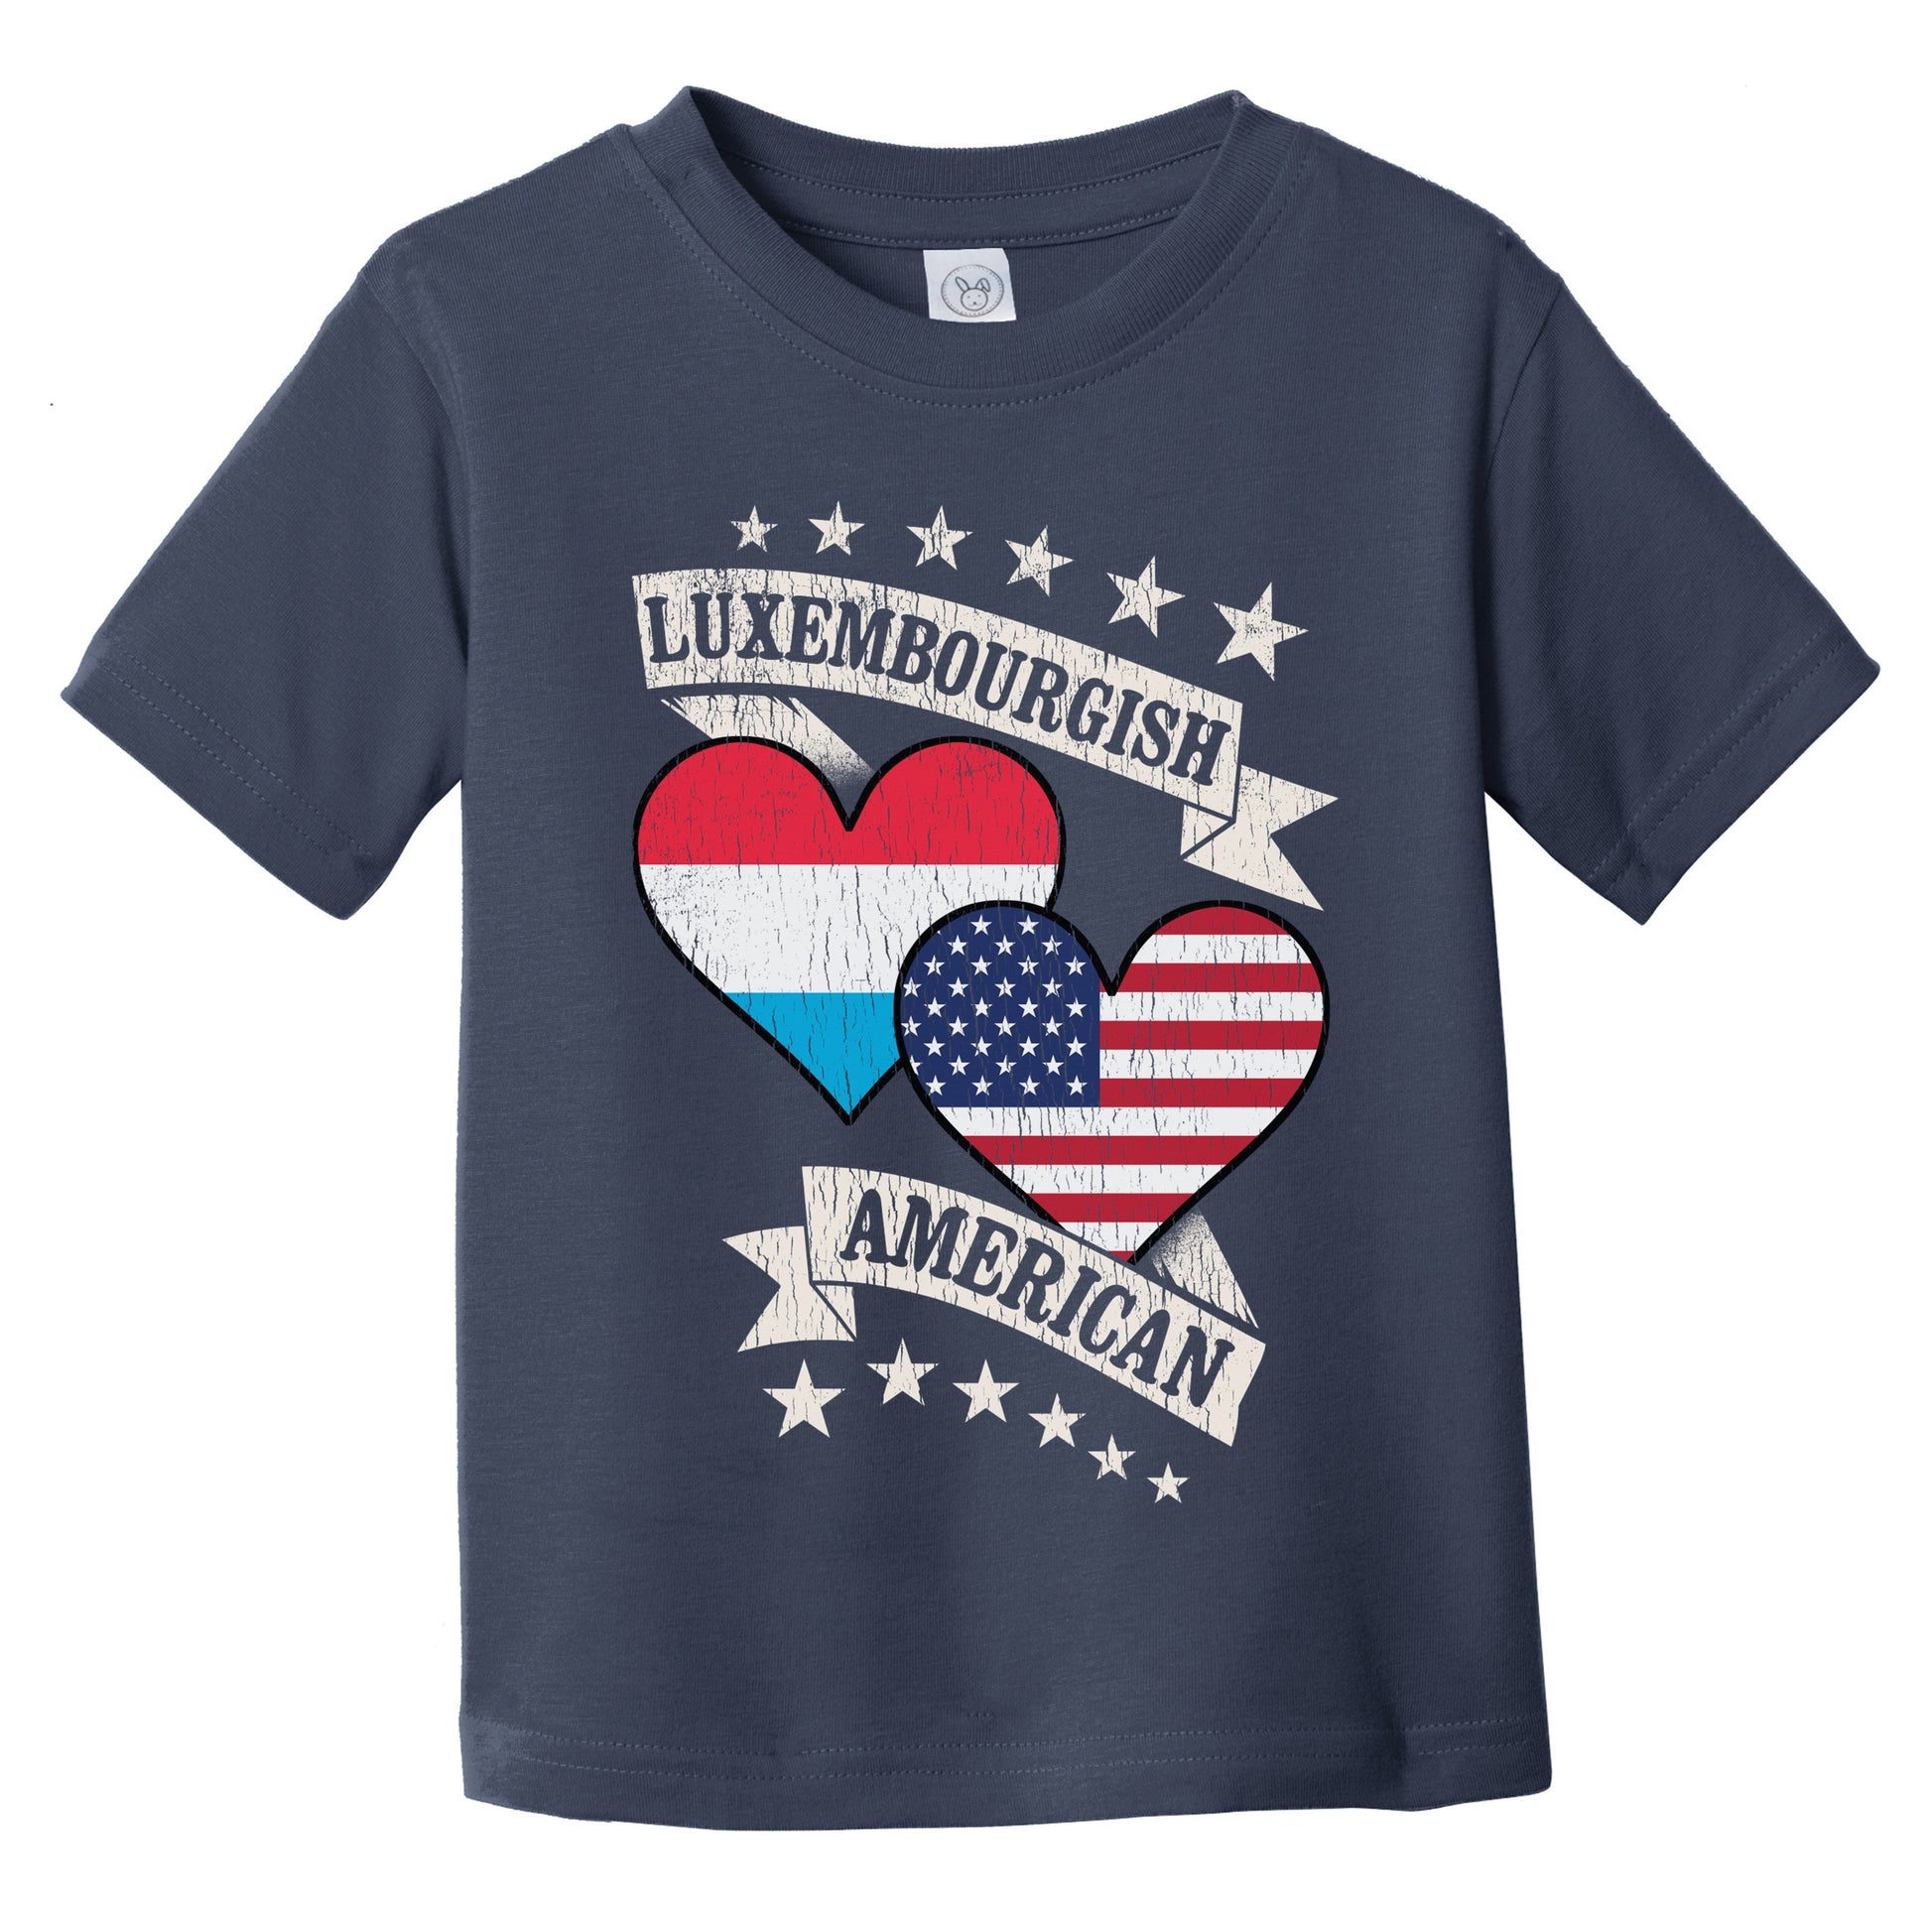 Luxembourgish American Heart Flags Luxembourg America Infant Toddler T-Shirt